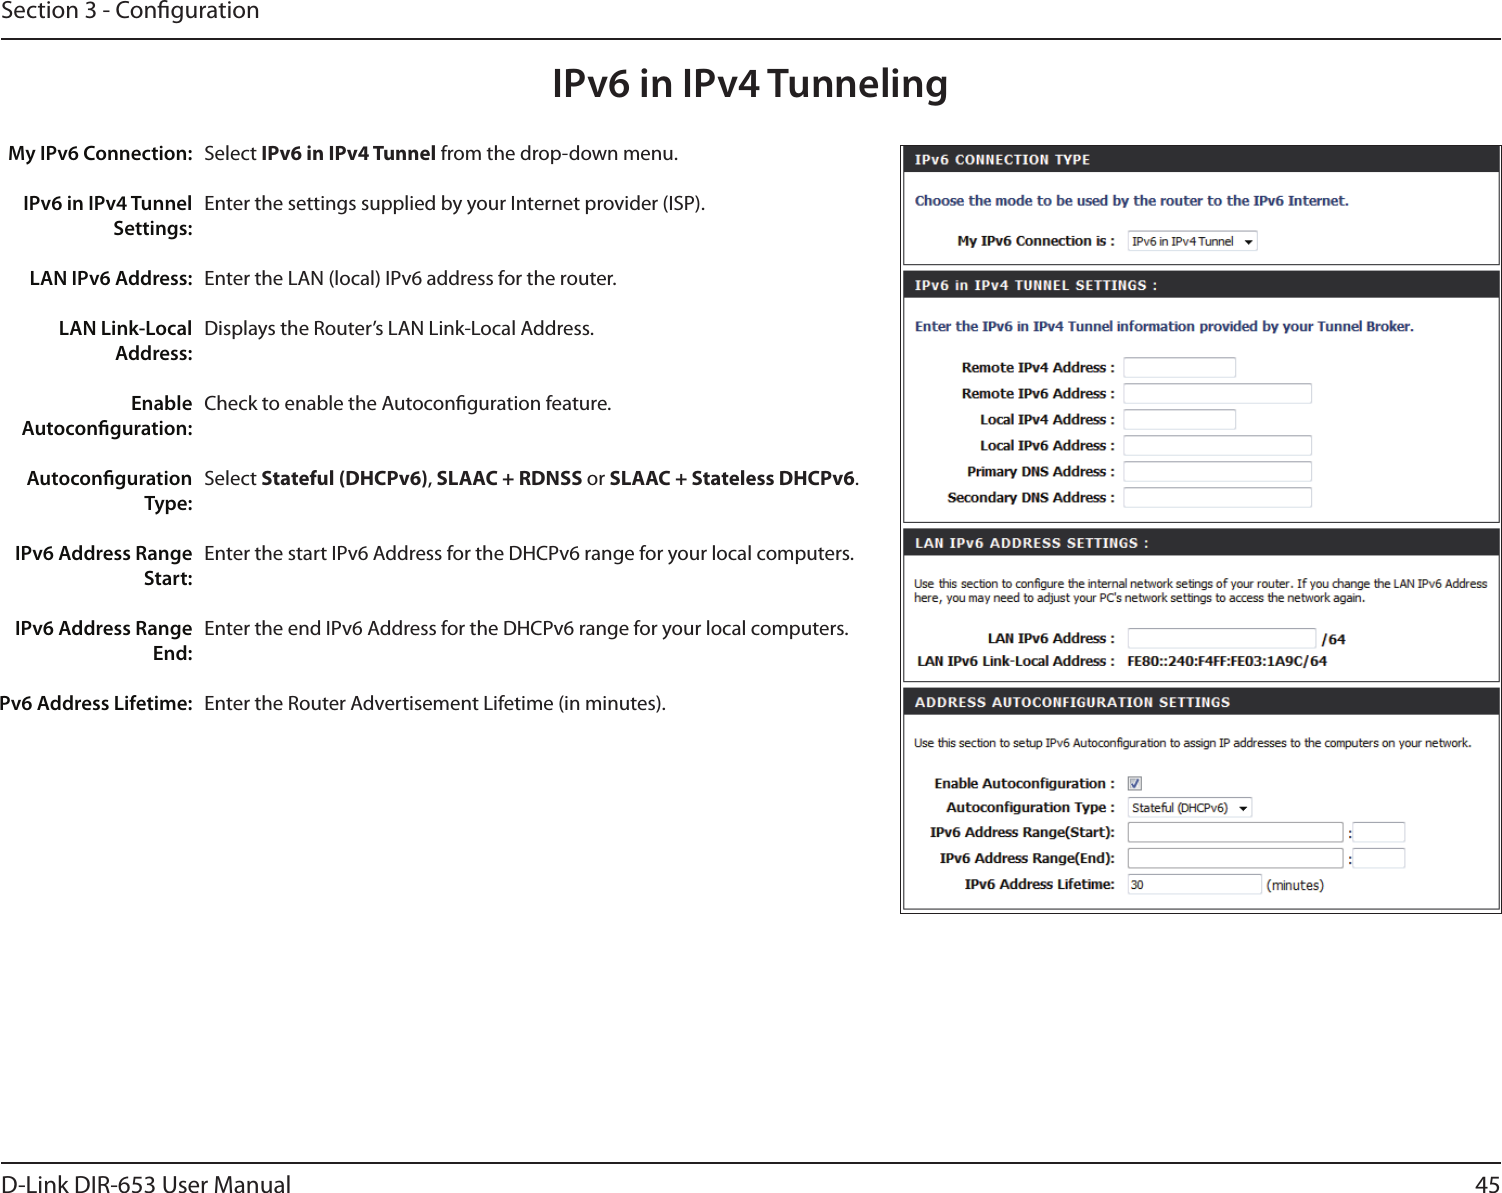 45D-Link DIR-653 User ManualSection 3 - CongurationIPv6 in IPv4 TunnelingSelect IPv6 in IPv4 Tunnel from the drop-down menu.Enter the settings supplied by your Internet provider (ISP). Enter the LAN (local) IPv6 address for the router. Displays the Router’s LAN Link-Local Address.Check to enable the Autoconguration feature.Select Stateful (DHCPv6), SLAAC + RDNSS or SLAAC + Stateless DHCPv6. Enter the start IPv6 Address for the DHCPv6 range for your local computers.Enter the end IPv6 Address for the DHCPv6 range for your local computers.Enter the Router Advertisement Lifetime (in minutes).My IPv6 Connection:IPv6 in IPv4 Tunnel Settings:LAN IPv6 Address:LAN Link-Local Address:Enable Autoconguration:Autoconguration Type:IPv6 Address Range Start:IPv6 Address Range End:Pv6 Address Lifetime: